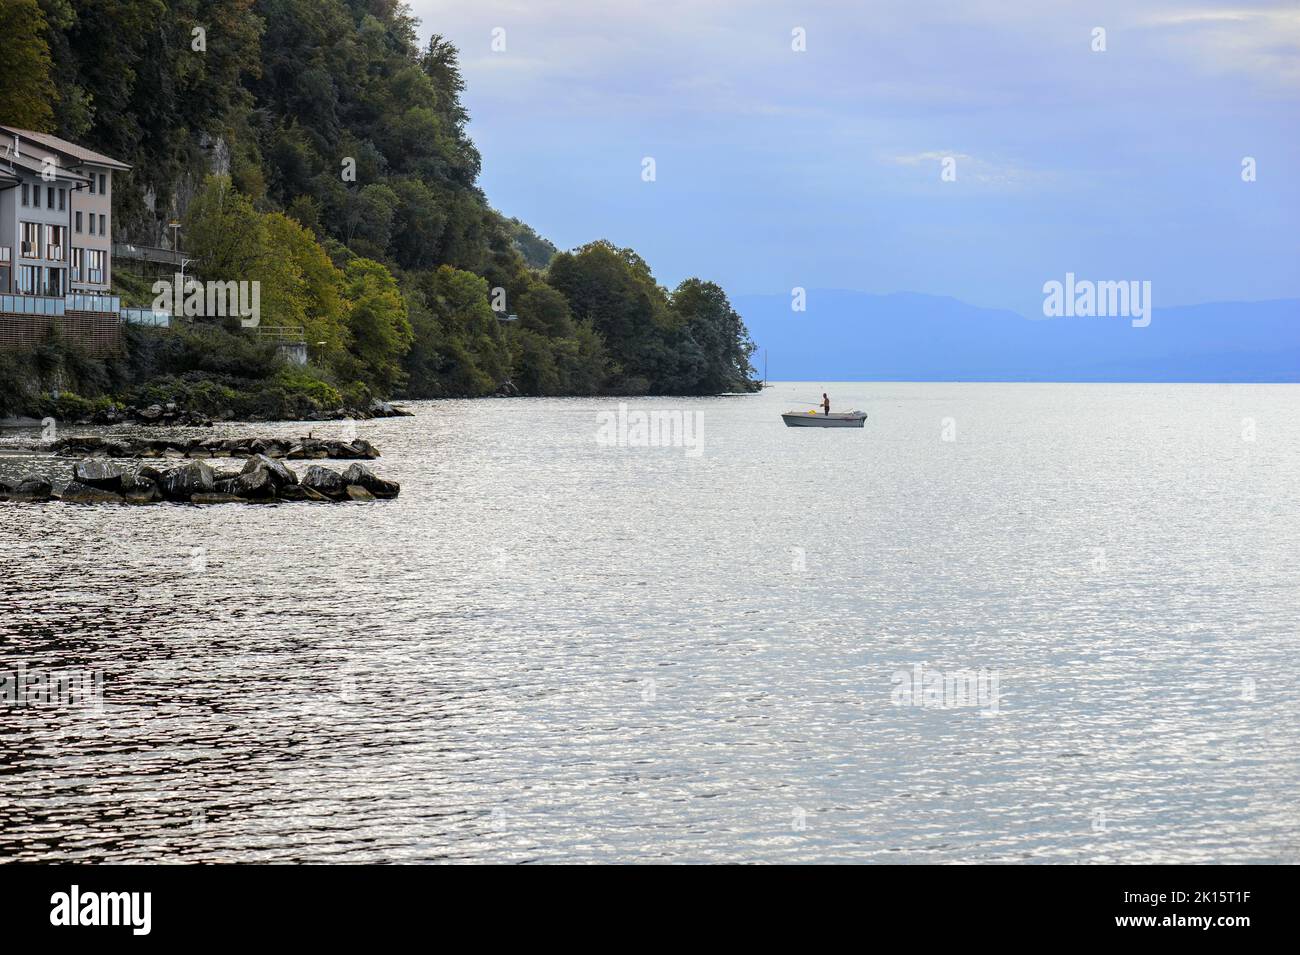 Fisherman in a boat, in the evening on the calm waters of Lake Geneva. Silhouette in backlight of a fisherman and his boat in front of the mountain; Stock Photo